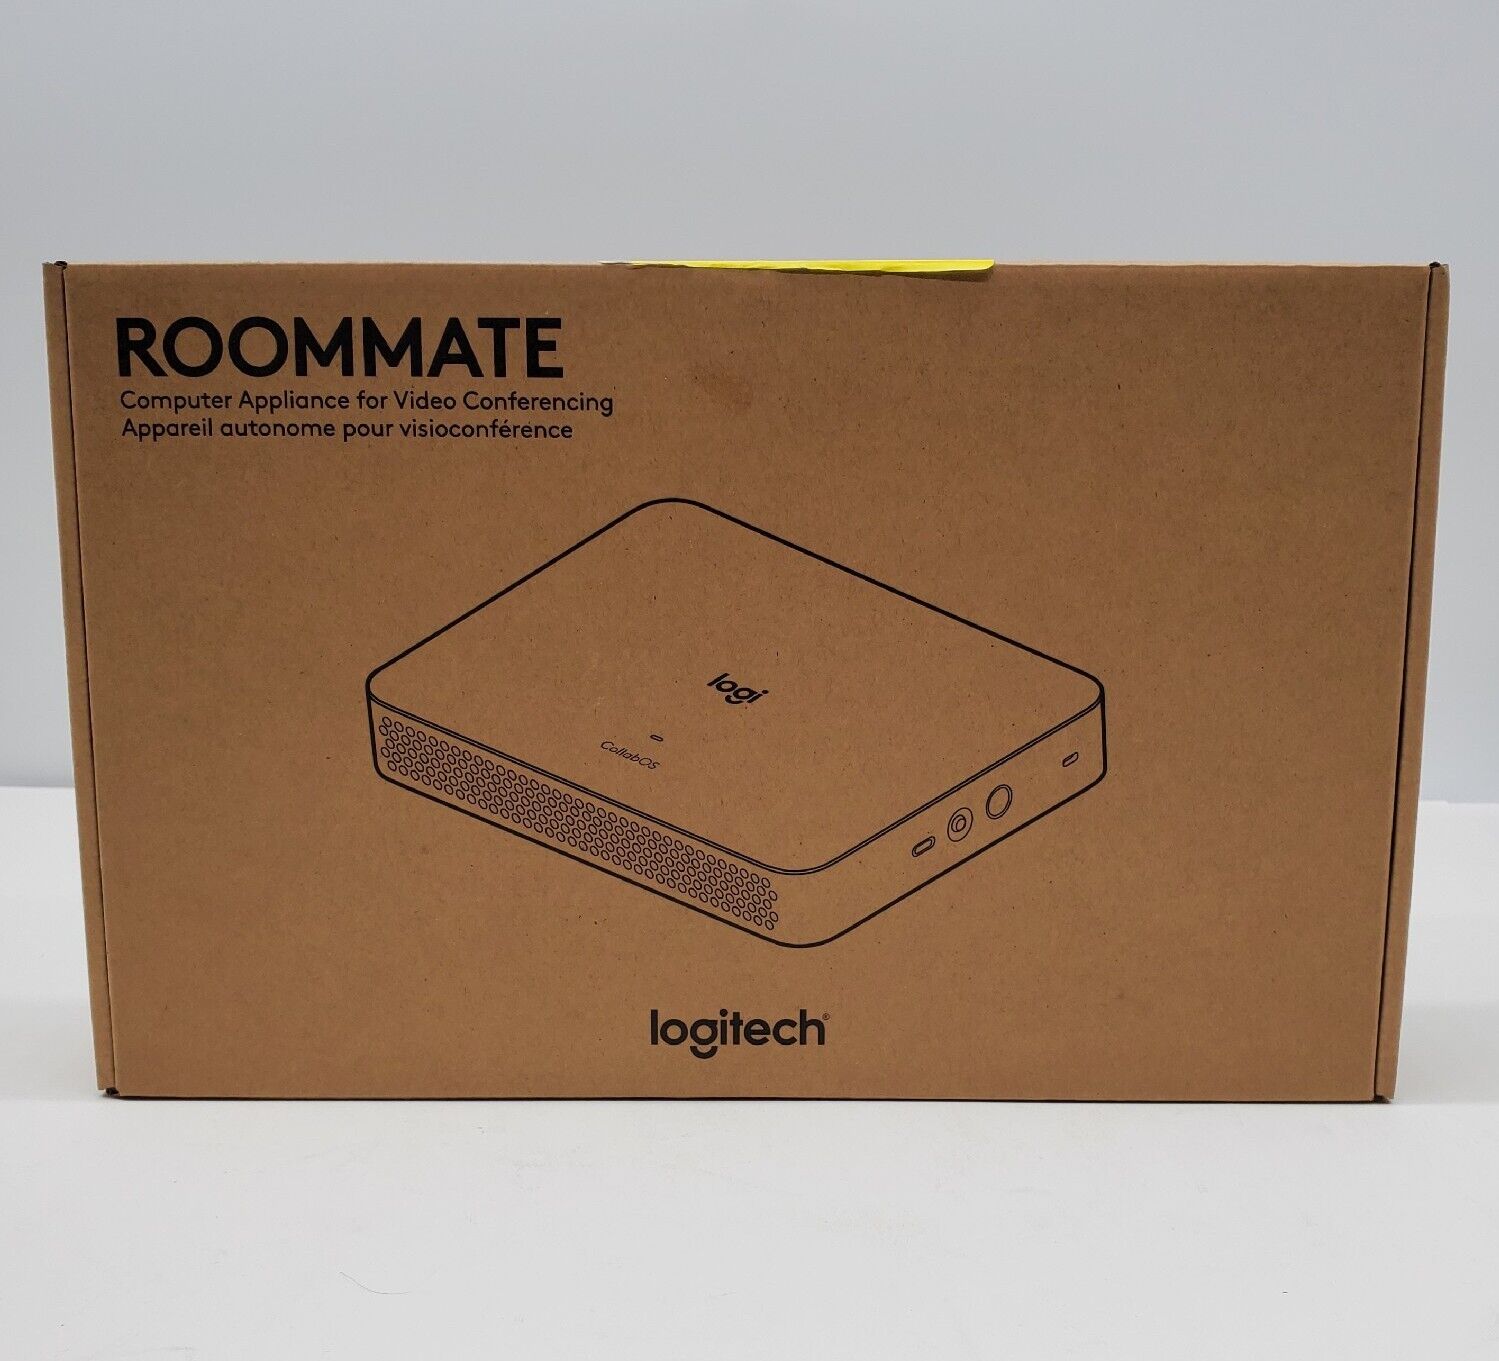 Logitech Roommate Computer Appliance For Video Conferencing PN 950-000081